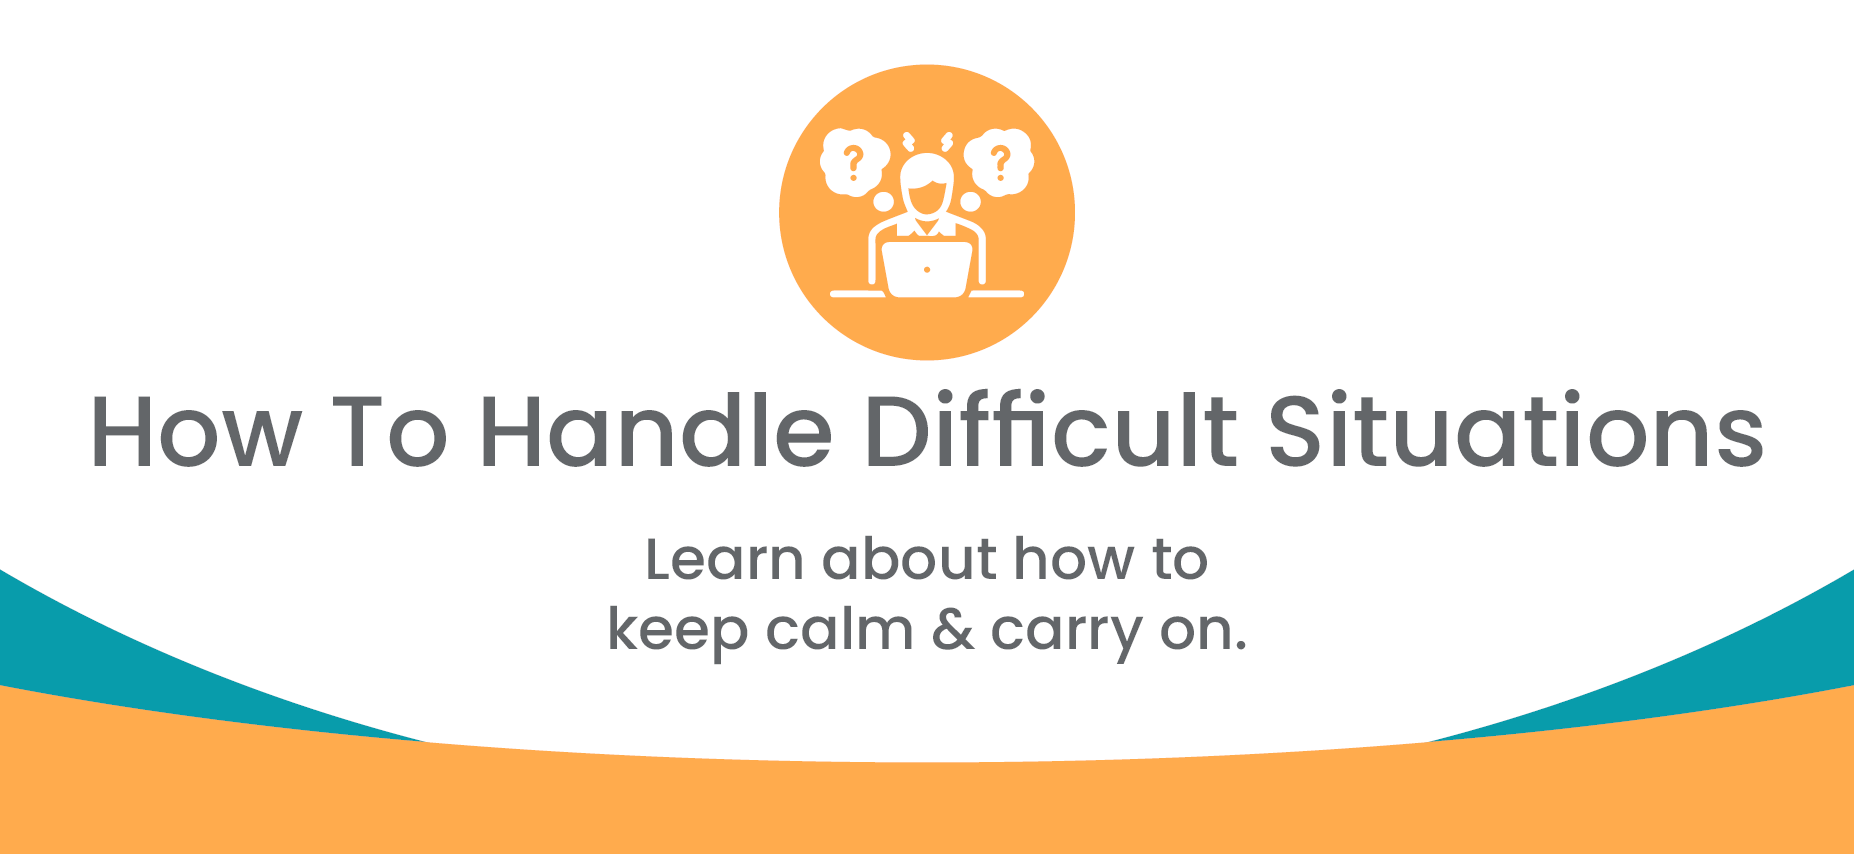 How to Handle Difficult Situations 